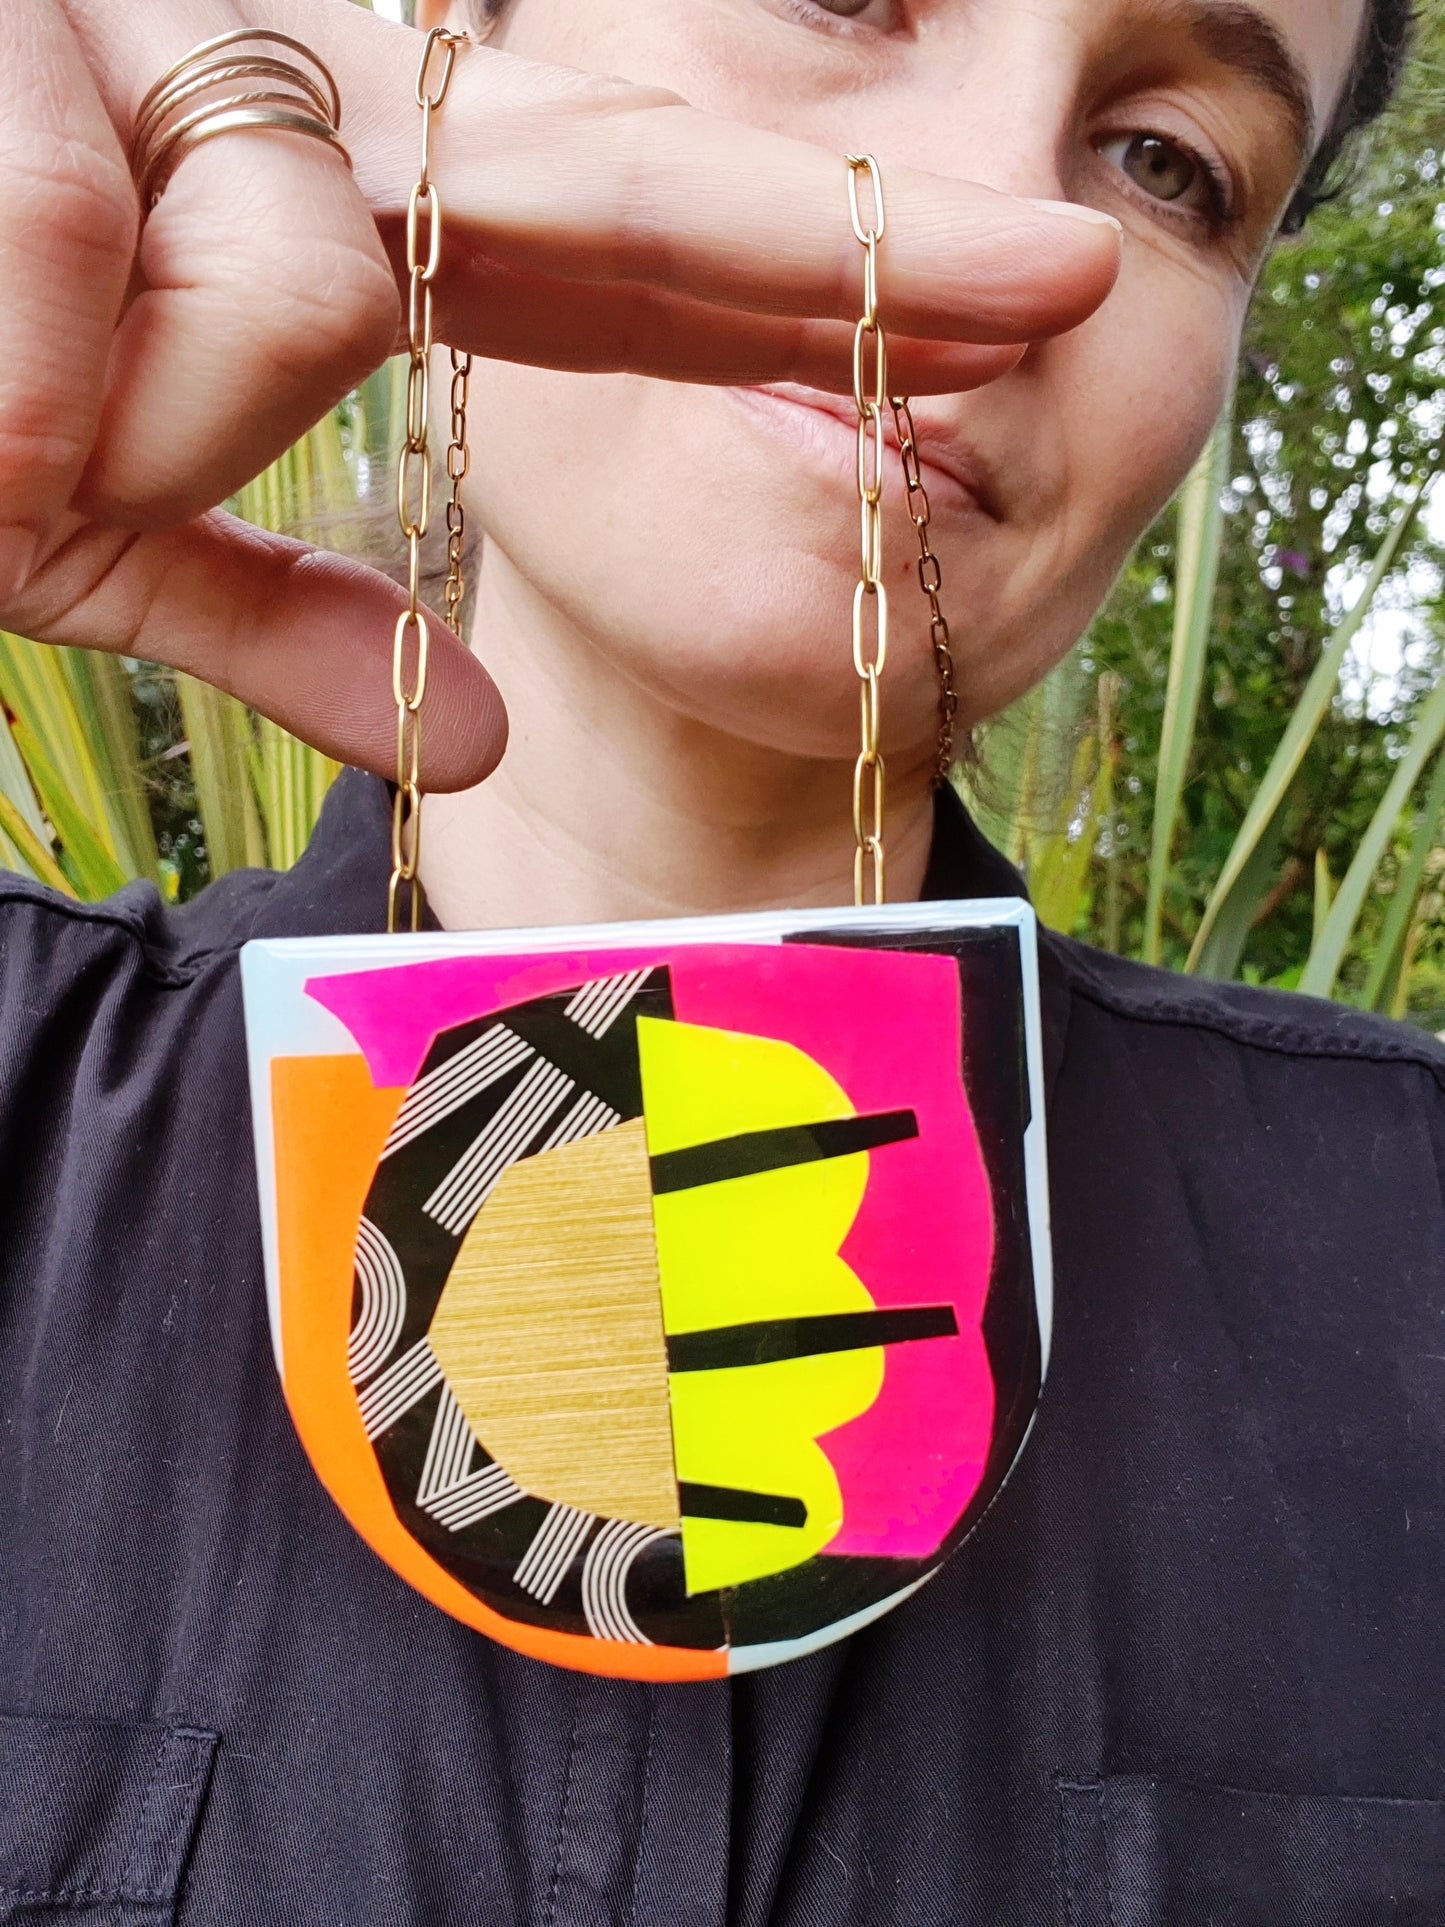 "Méduse" / One of a kind upcycled vinyl record art necklace / free shipping